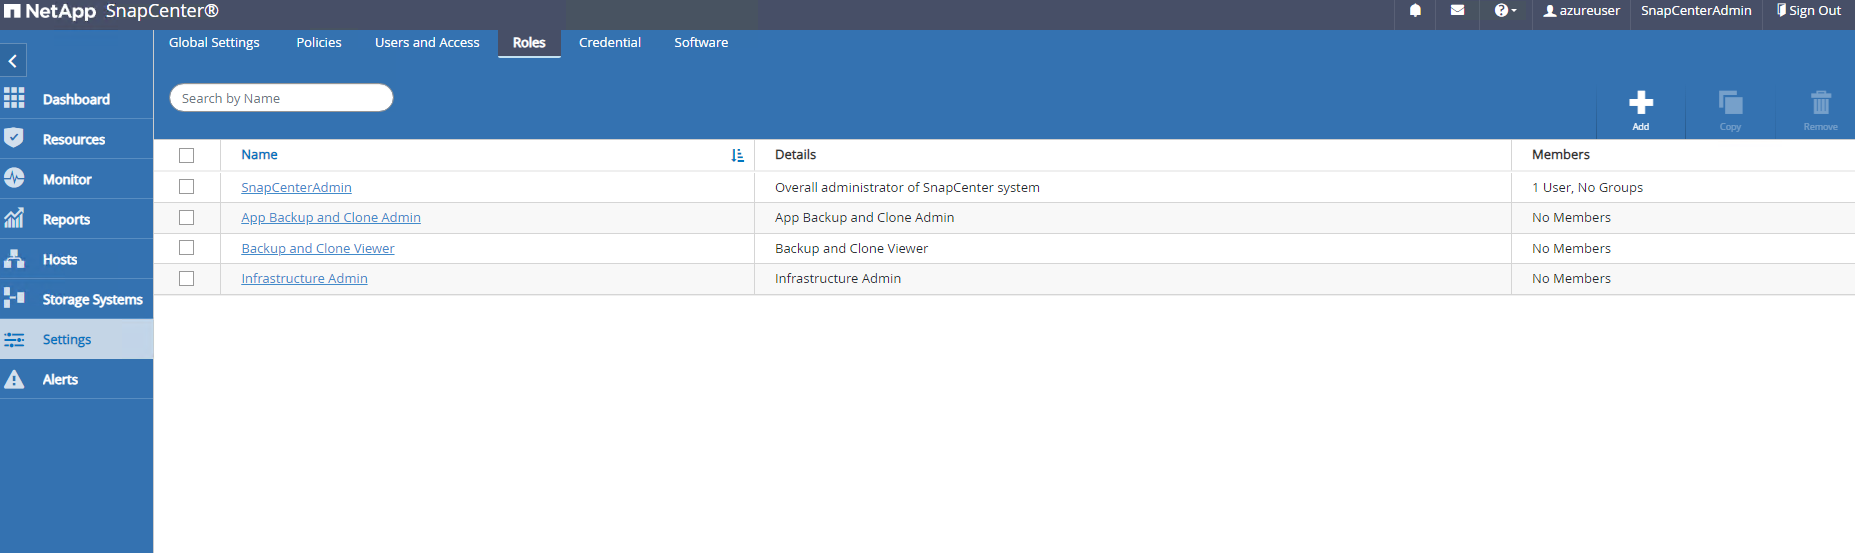 This image provides Roles for SnapCenter server